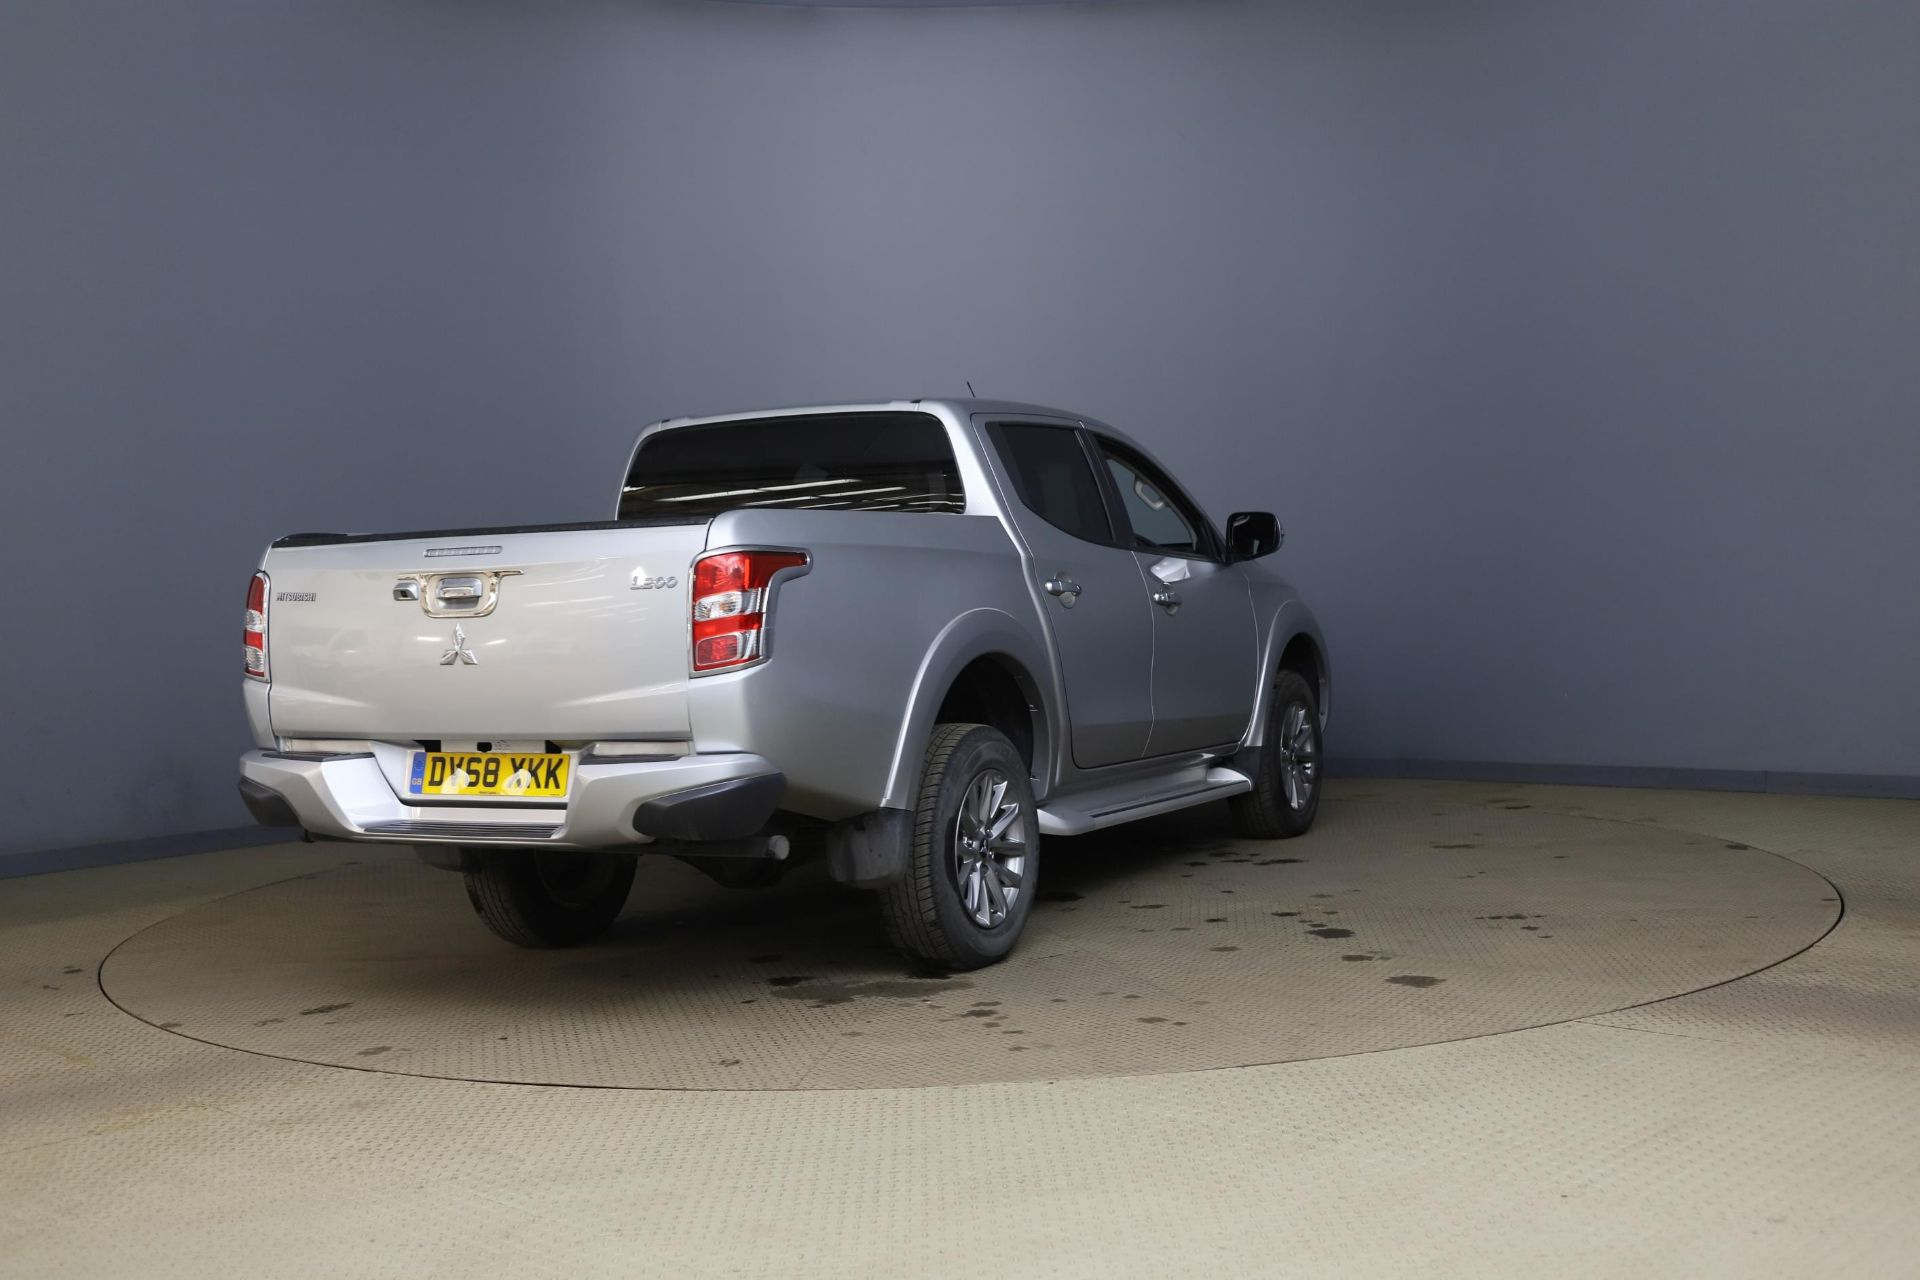 Mitsubishi L200 2.4 DI-D Double Cab Barbarian - 2019 Model - 1 Owner - Only 17K Miles - Image 2 of 12